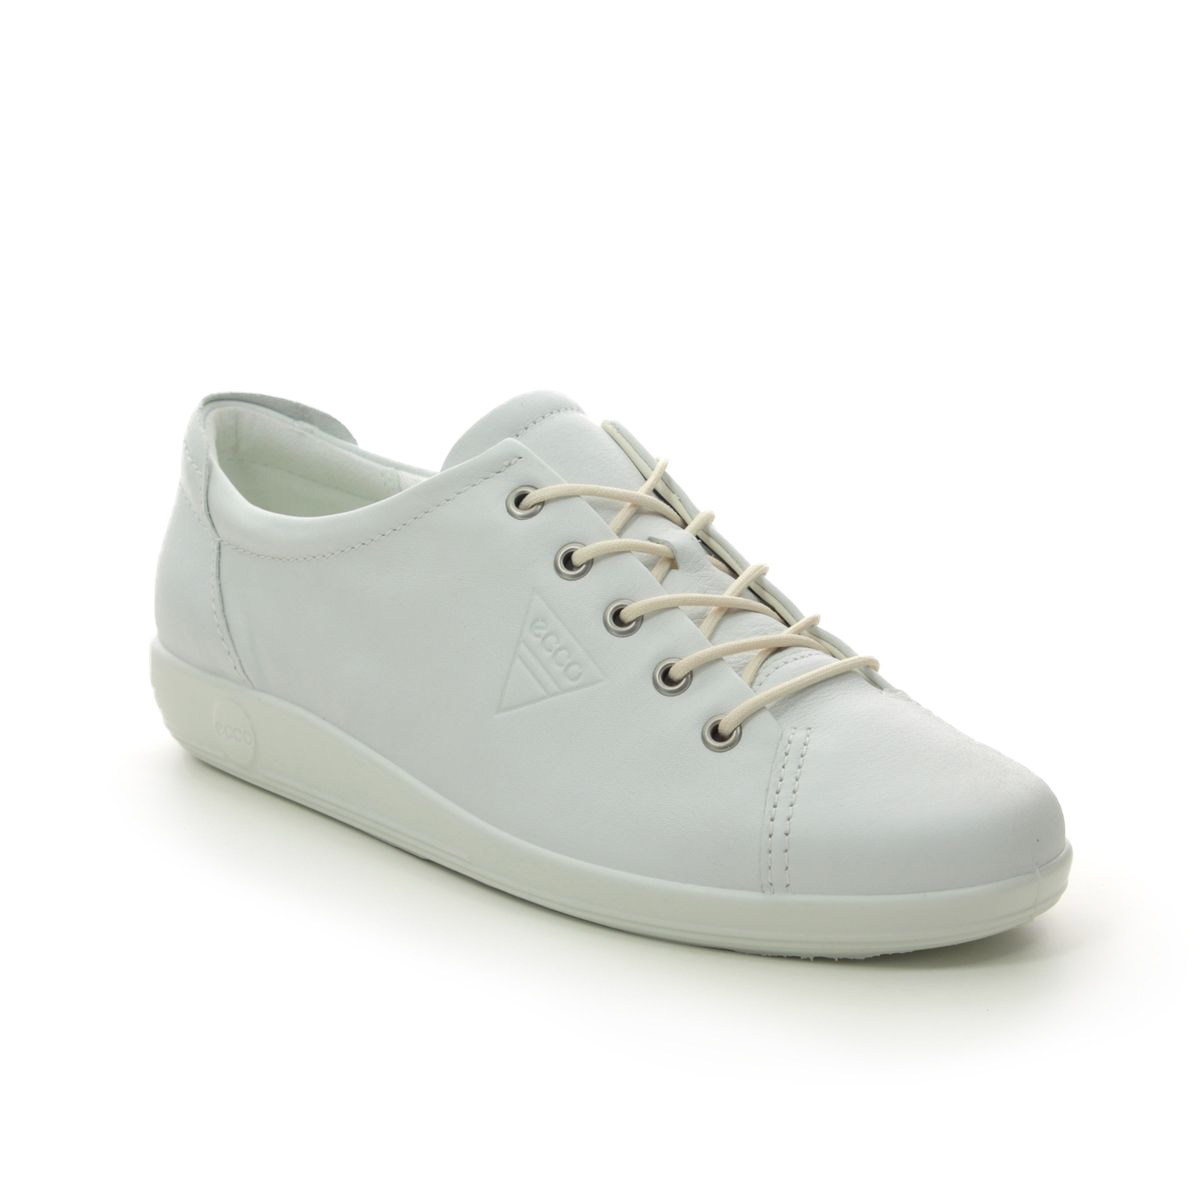 ECCO Soft 2.0 White Leather Womens lacing shoes 206503-01007